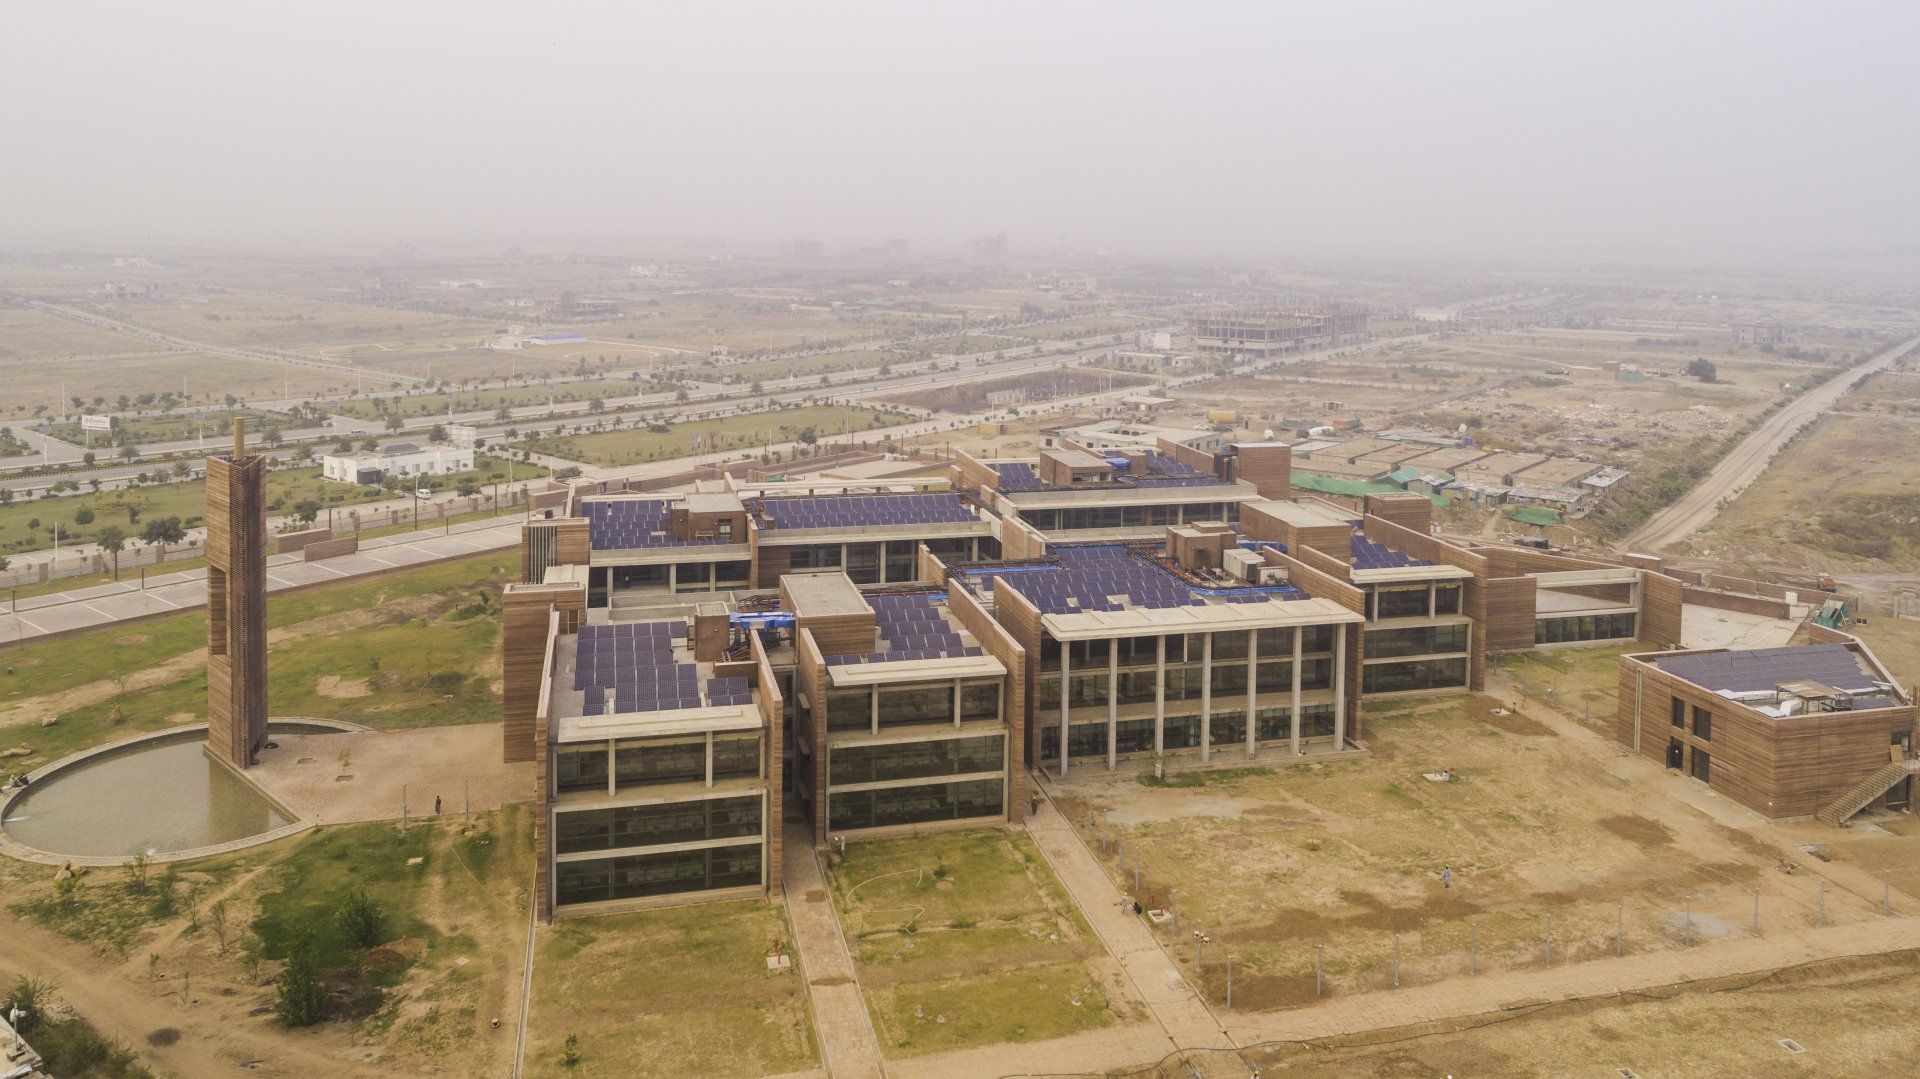 areal view of Telenor Tower complex showing solar panels on the roofs